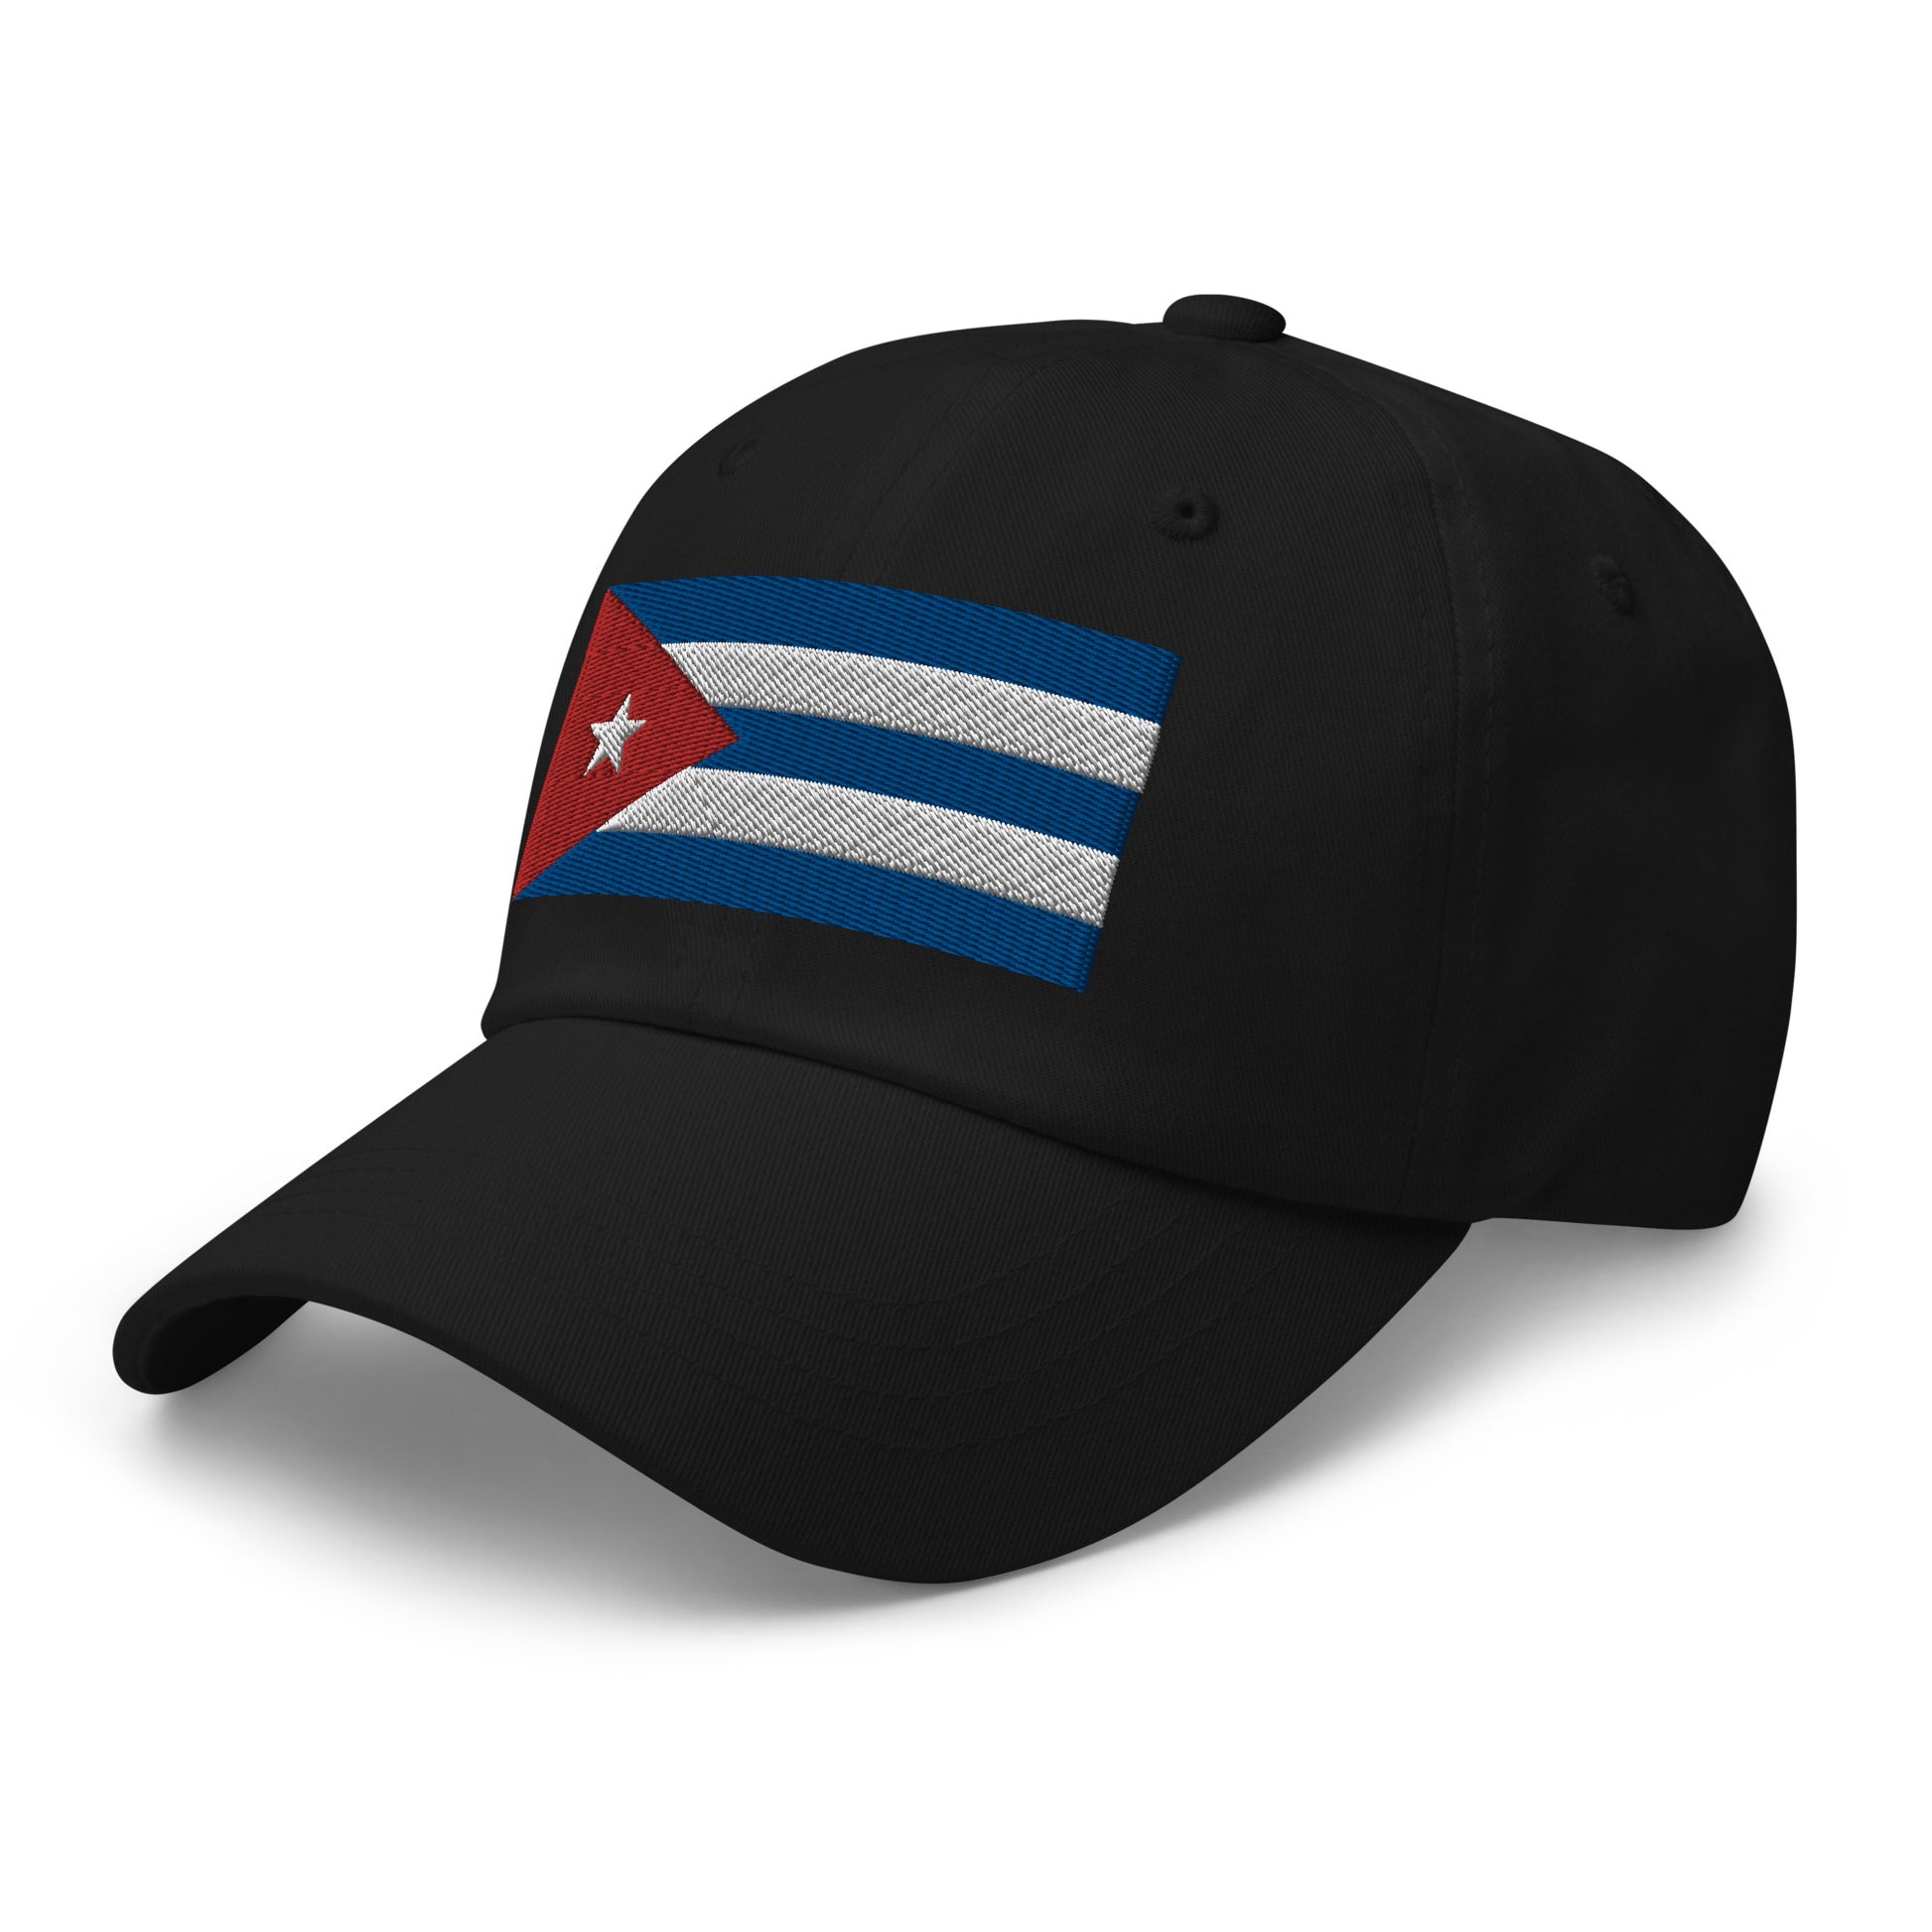 Cuban Flag Hat: Dad hat featuring a detailed embroidery of the Cuban flag.